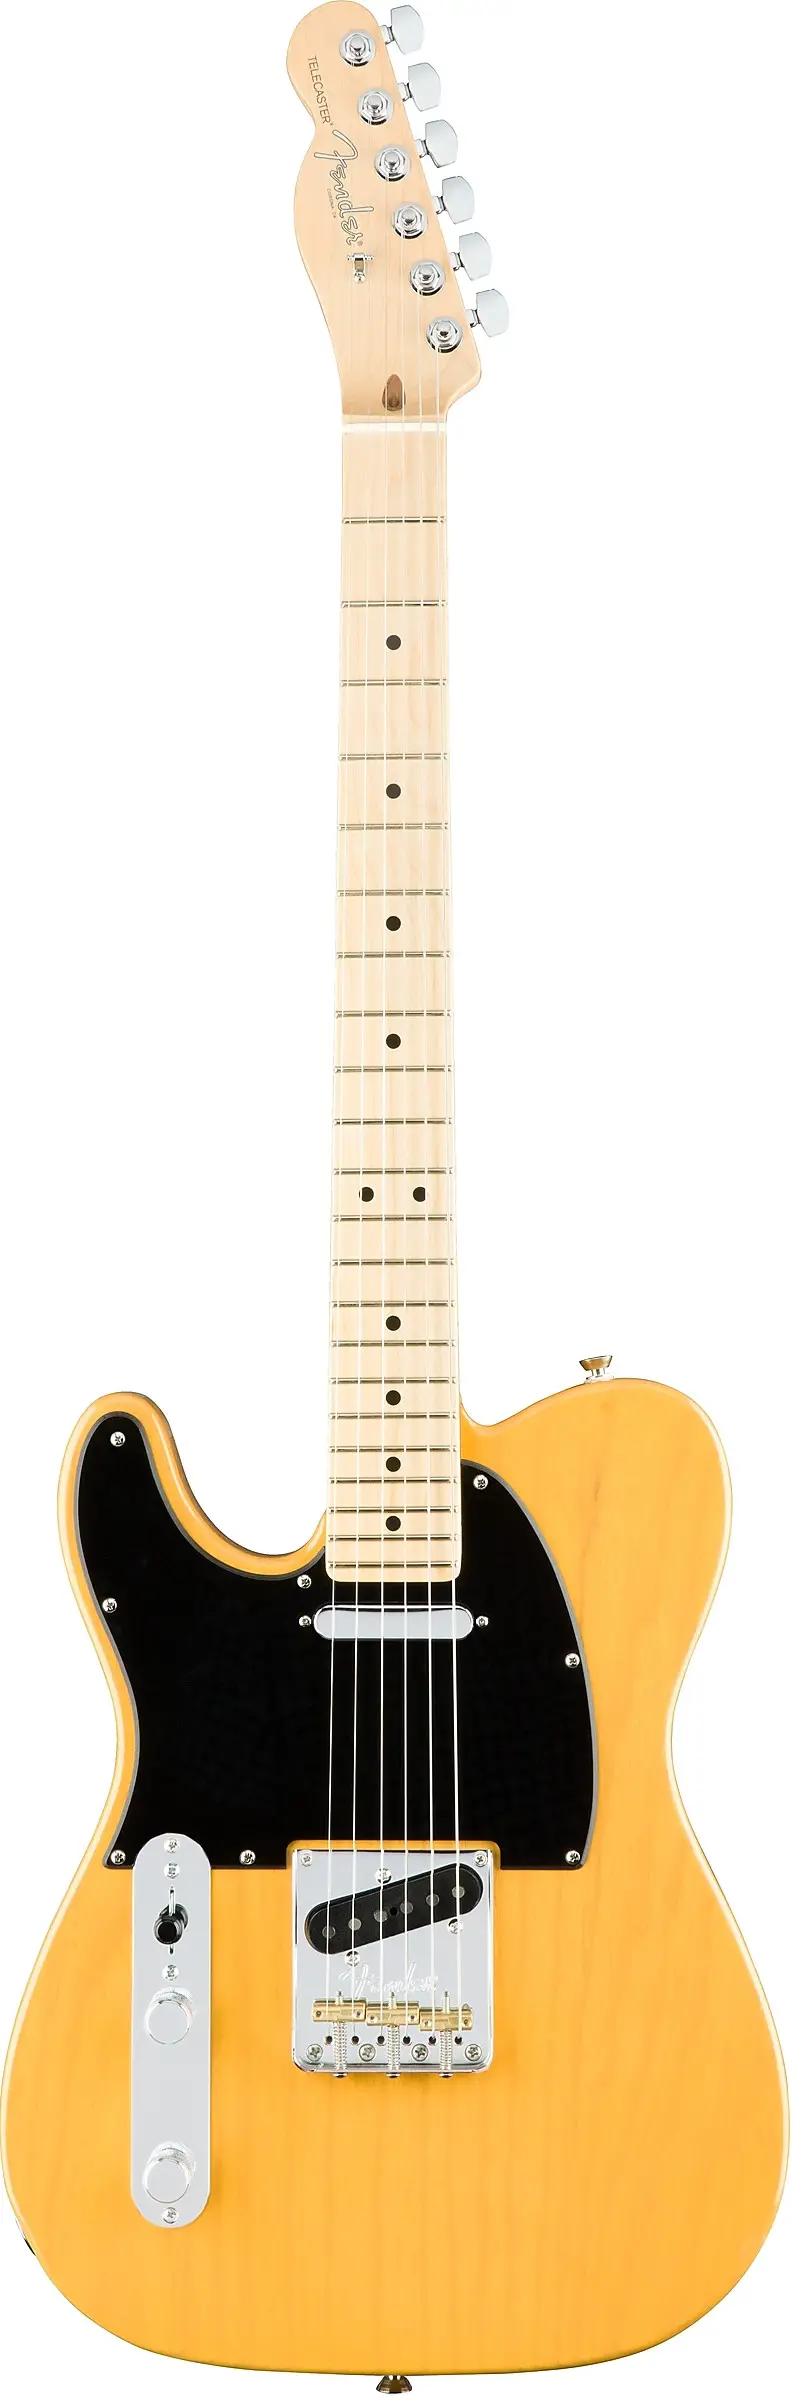 American Professional Telecaster Left-Hand by Fender